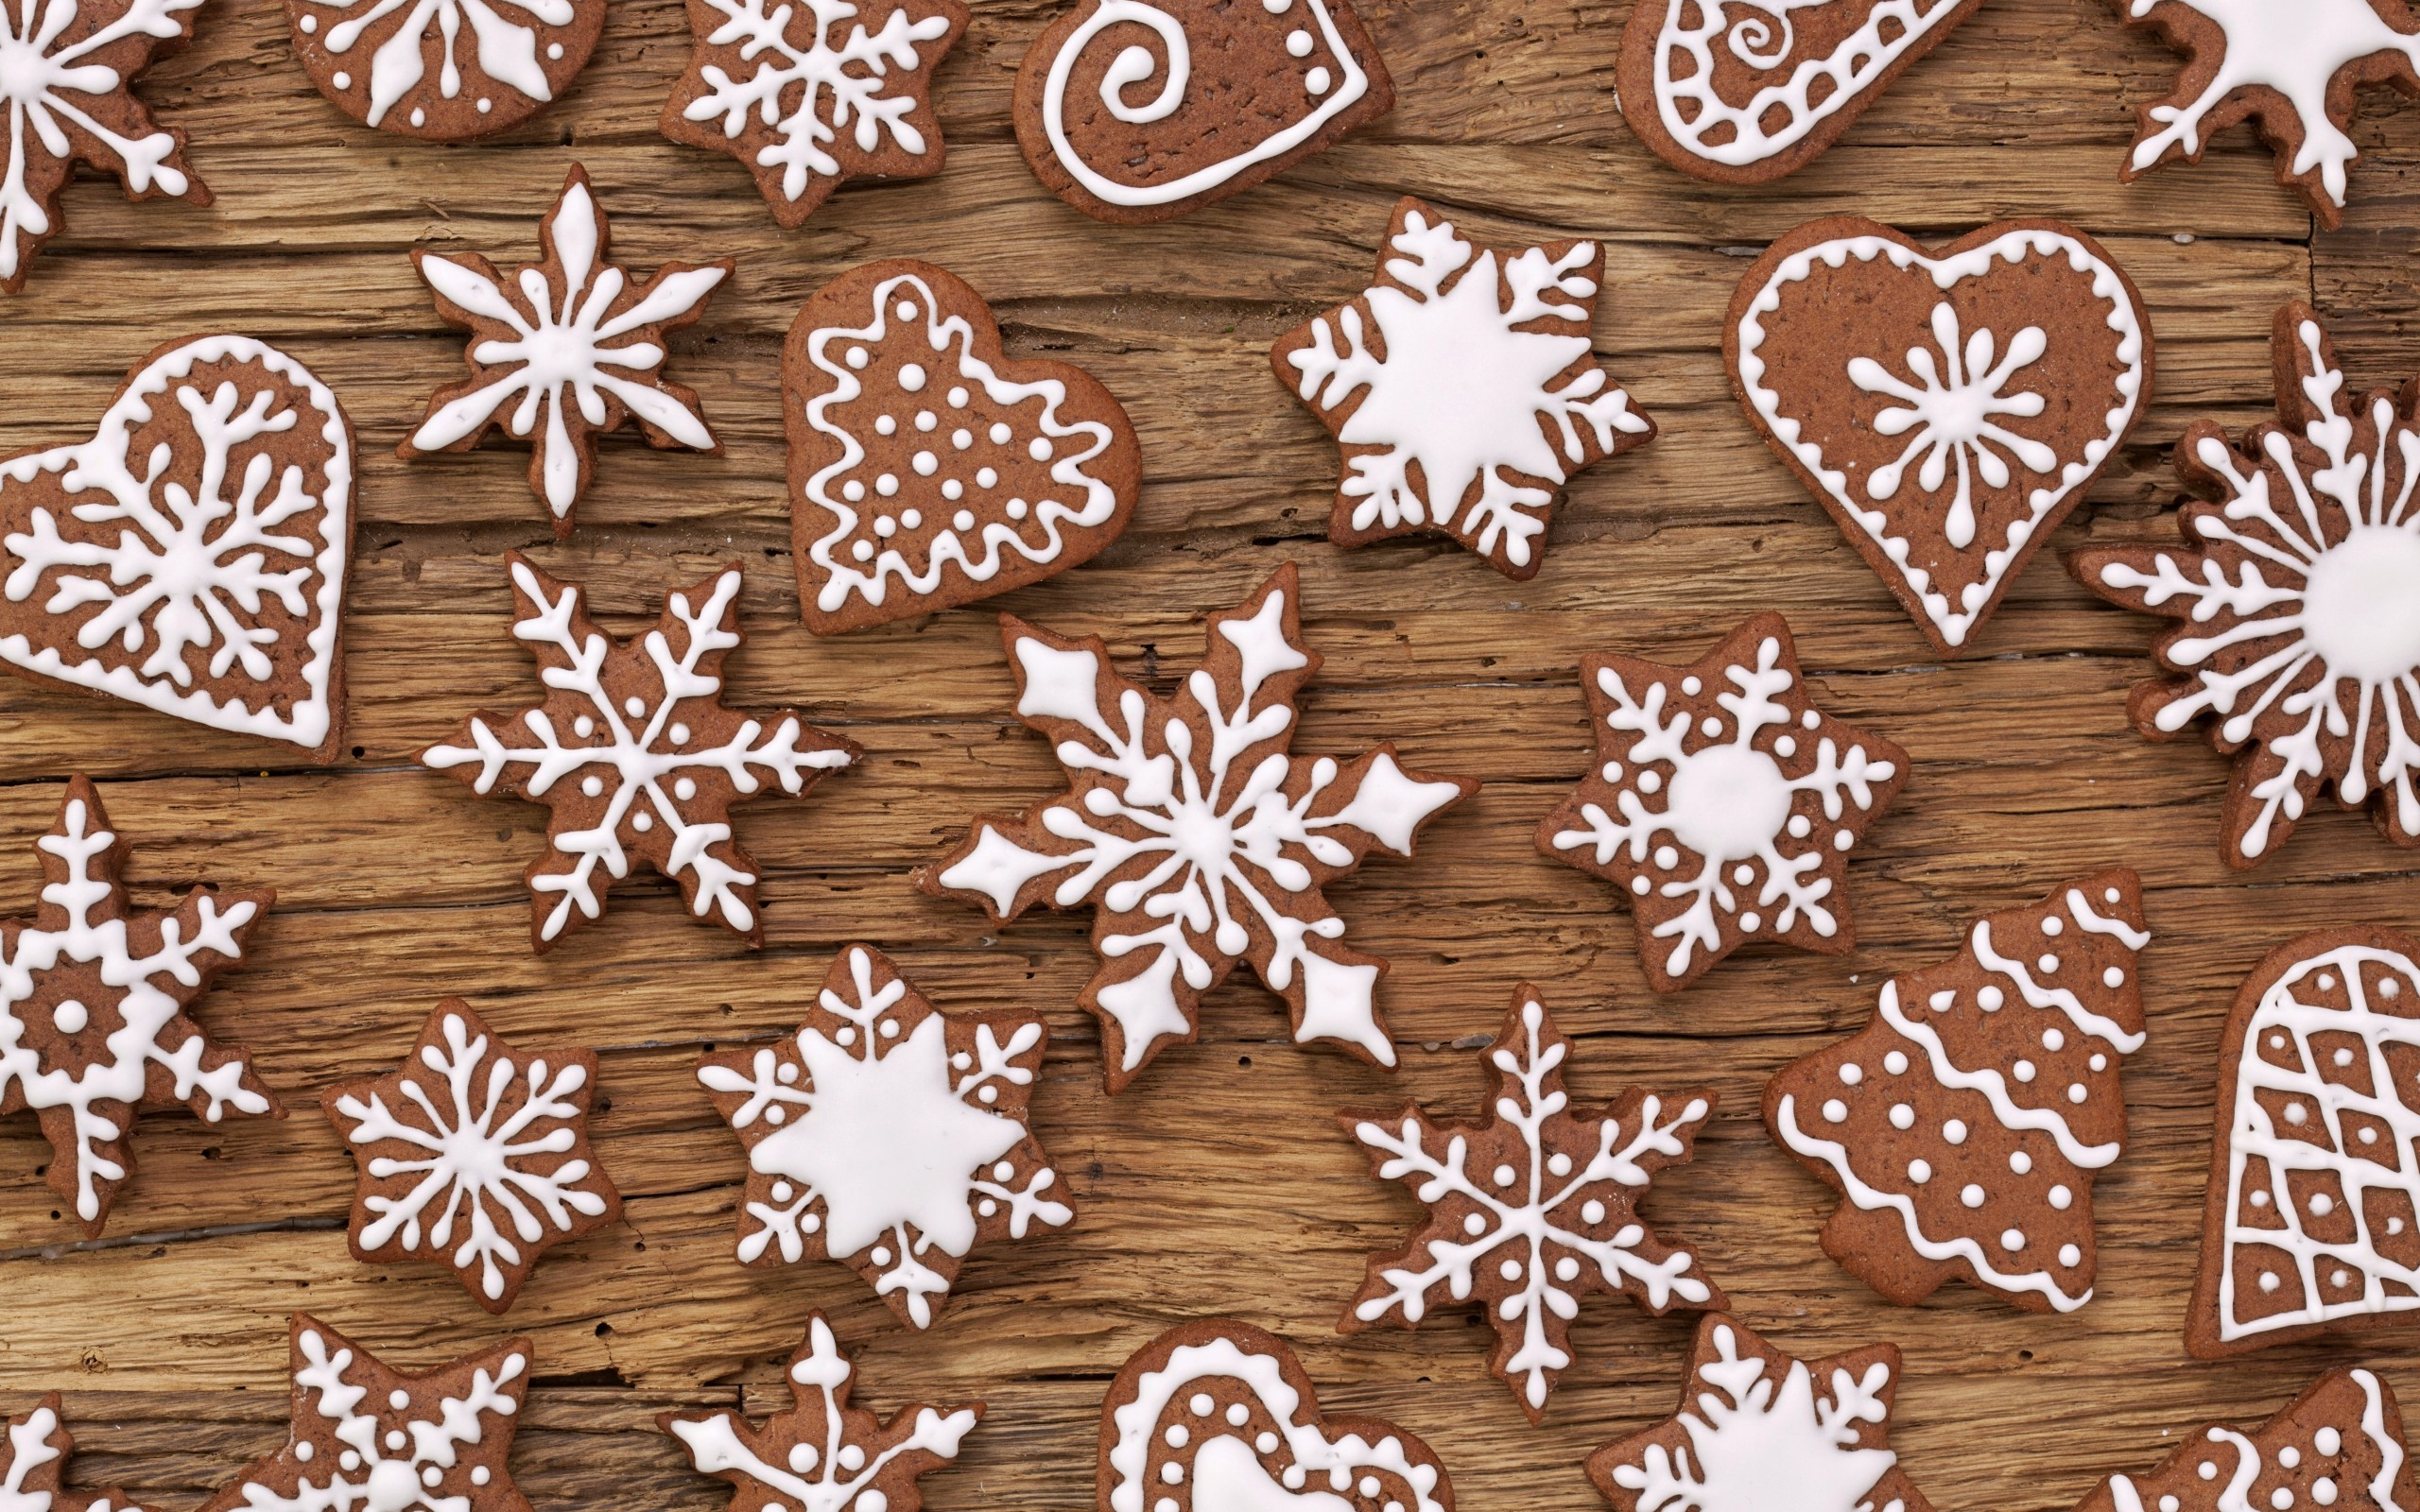 Christmas Cookies Wallpaper
 Awesome Biscuits wallpaper